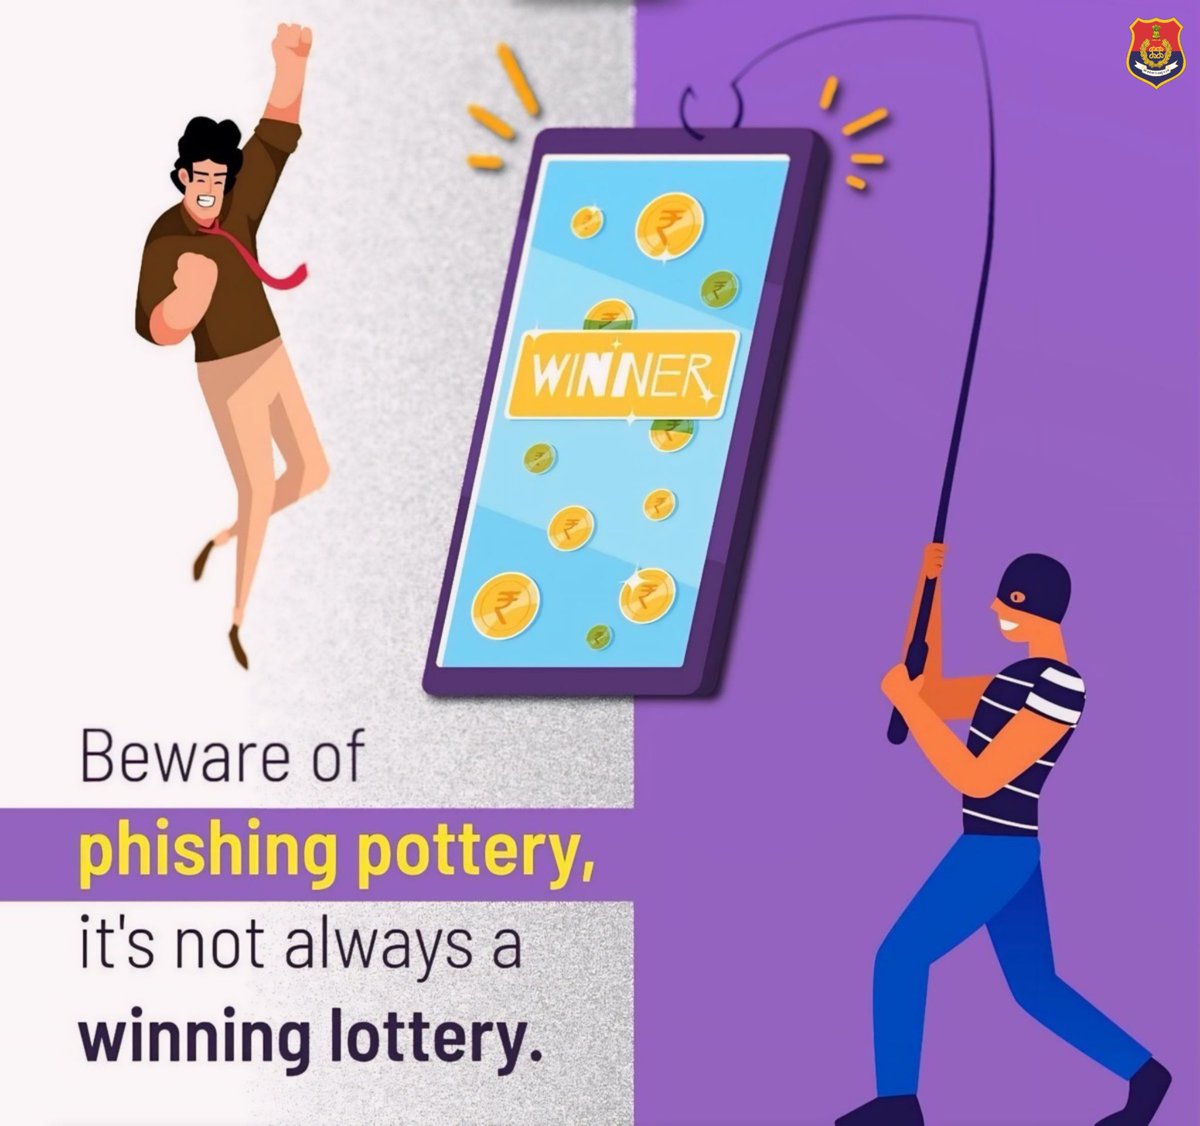 Beware of Lottery Fraud.
Don’t respond to unknown calls or believe on lottery text messages. It’s likely a fraud.
Stay aware & be safe.
#ScamAlert
#CyberSafety